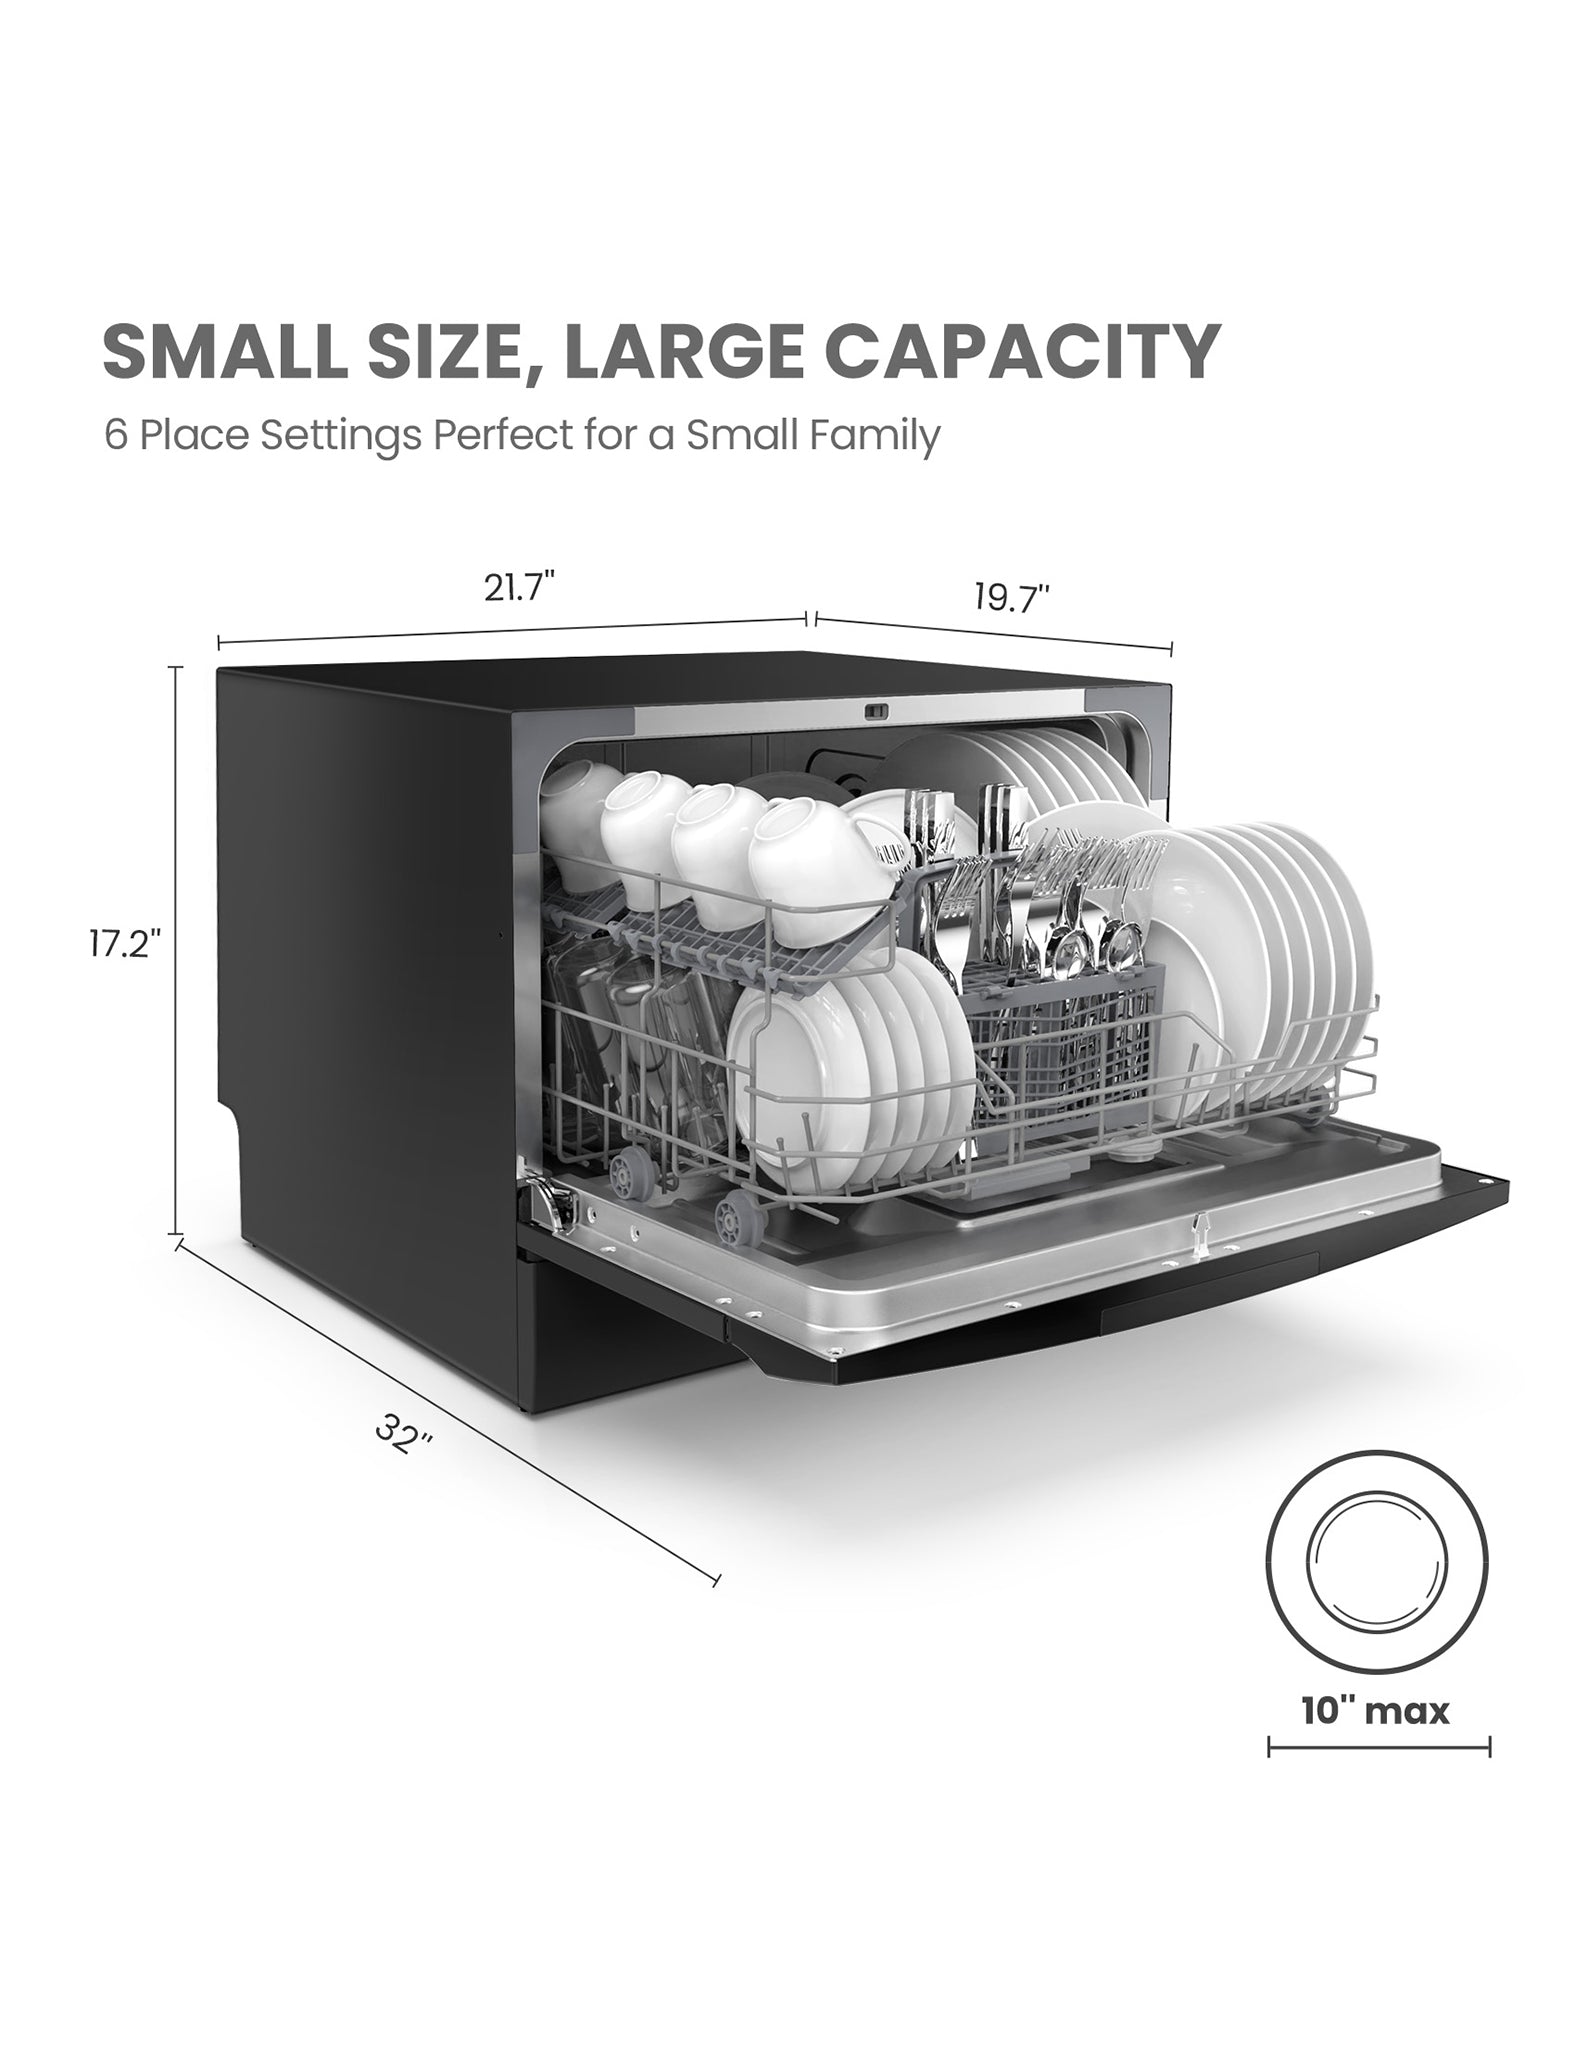 size dimensions of comfee countertop portable dishwasher open with dishes cups and plates inside its internal rack